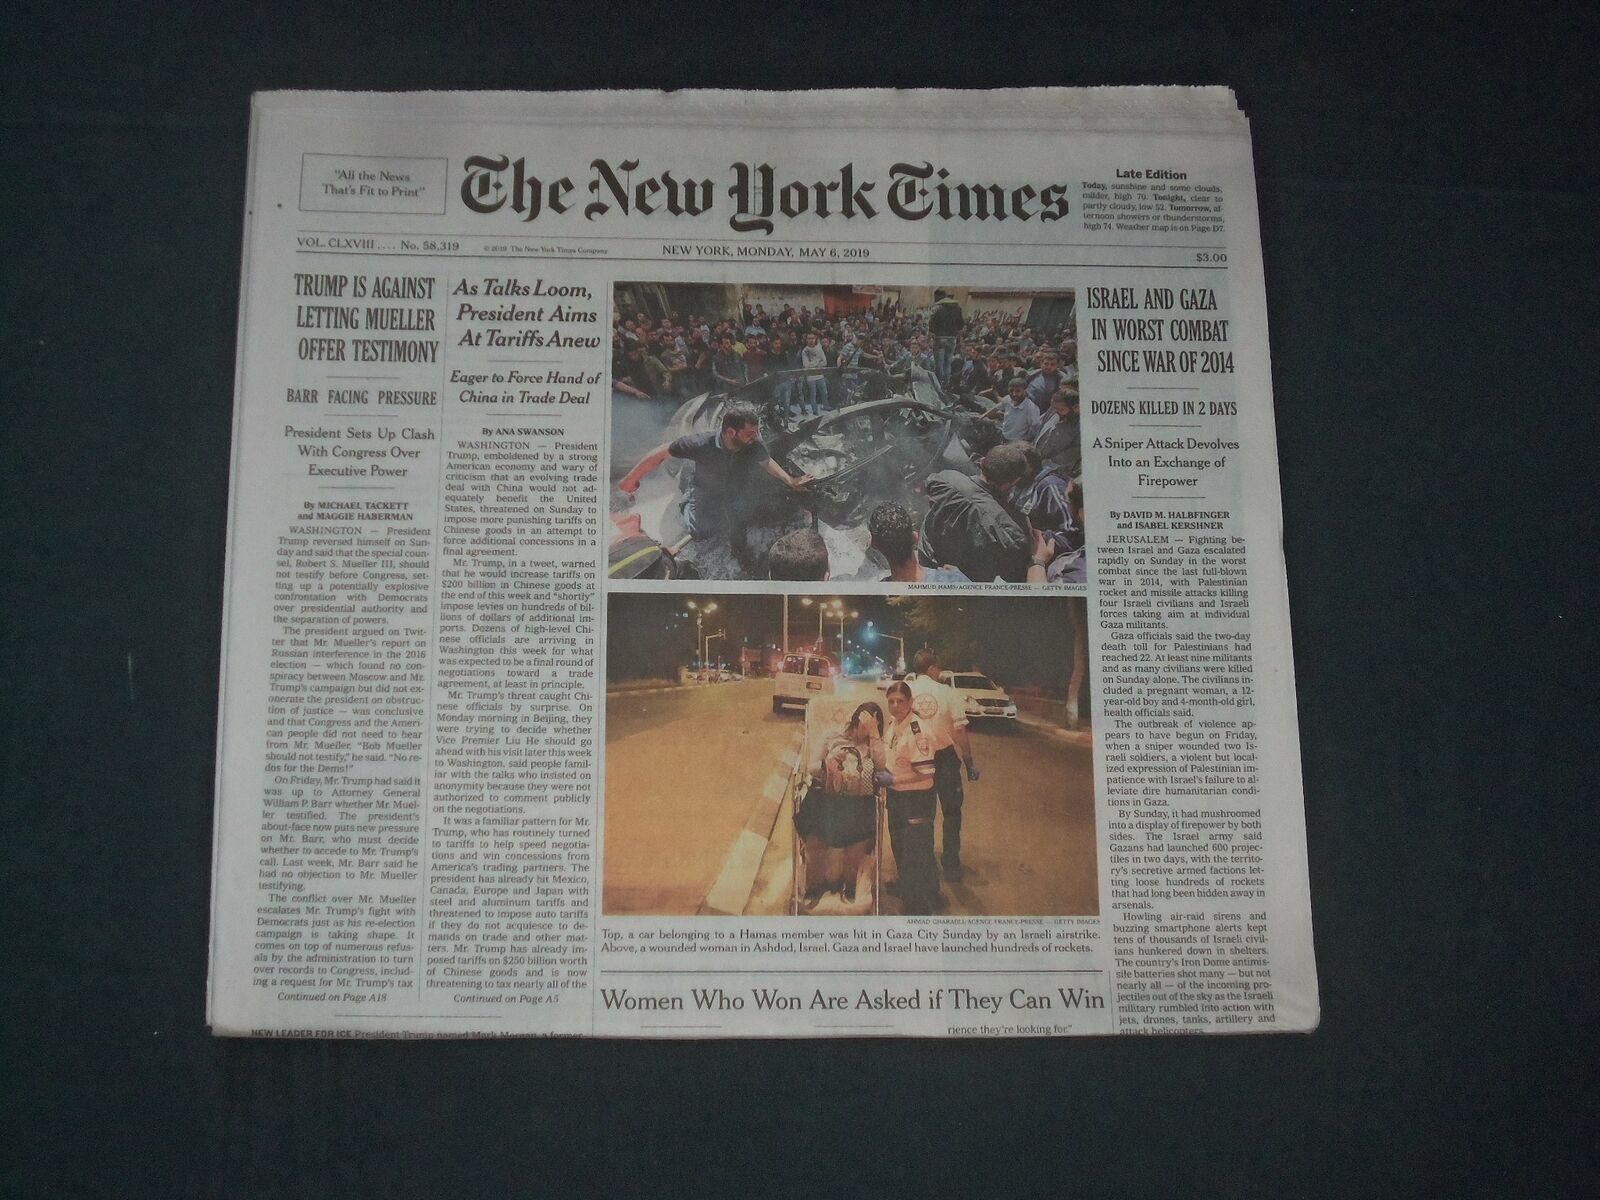 2019 MAY 6 NEW YORK TIMES - ISRAEL AND GAZA IN WORST COMBAT SINCE WAR OF 2014